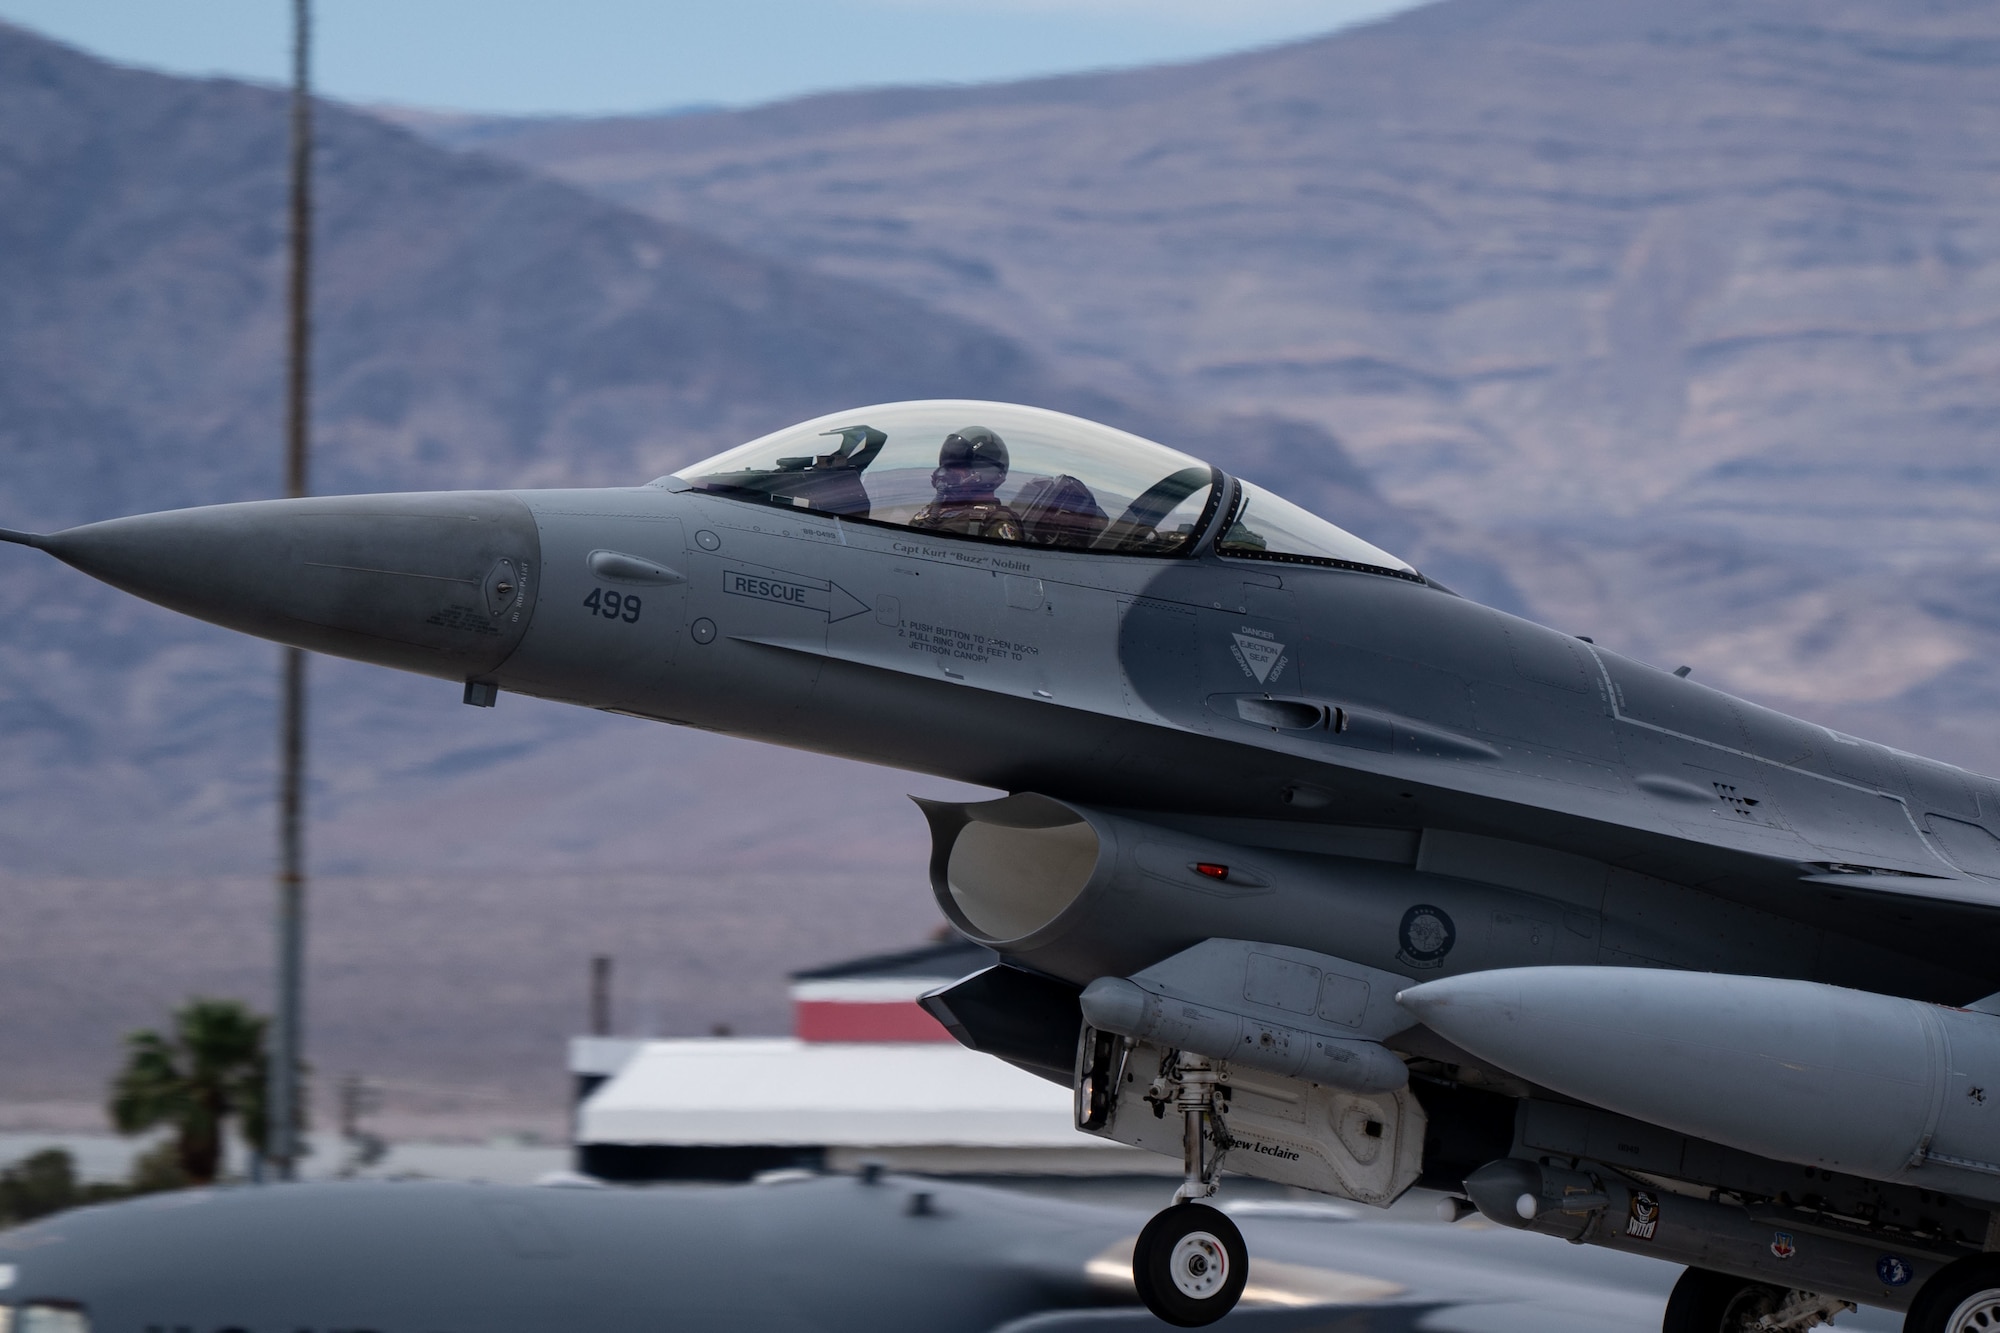 An F-16C assigned to the 422nd Test and Evaluation Squadron takes off during Black Flag 22-1 at Nellis Air Force Base, Nevada, May 10, 2022. The F-16 is highly maneuverable and has proven itself in air-to-air combat and air-to-surface attack. (U.S. Air Force photo by Airman 1st Class Josey Blades)